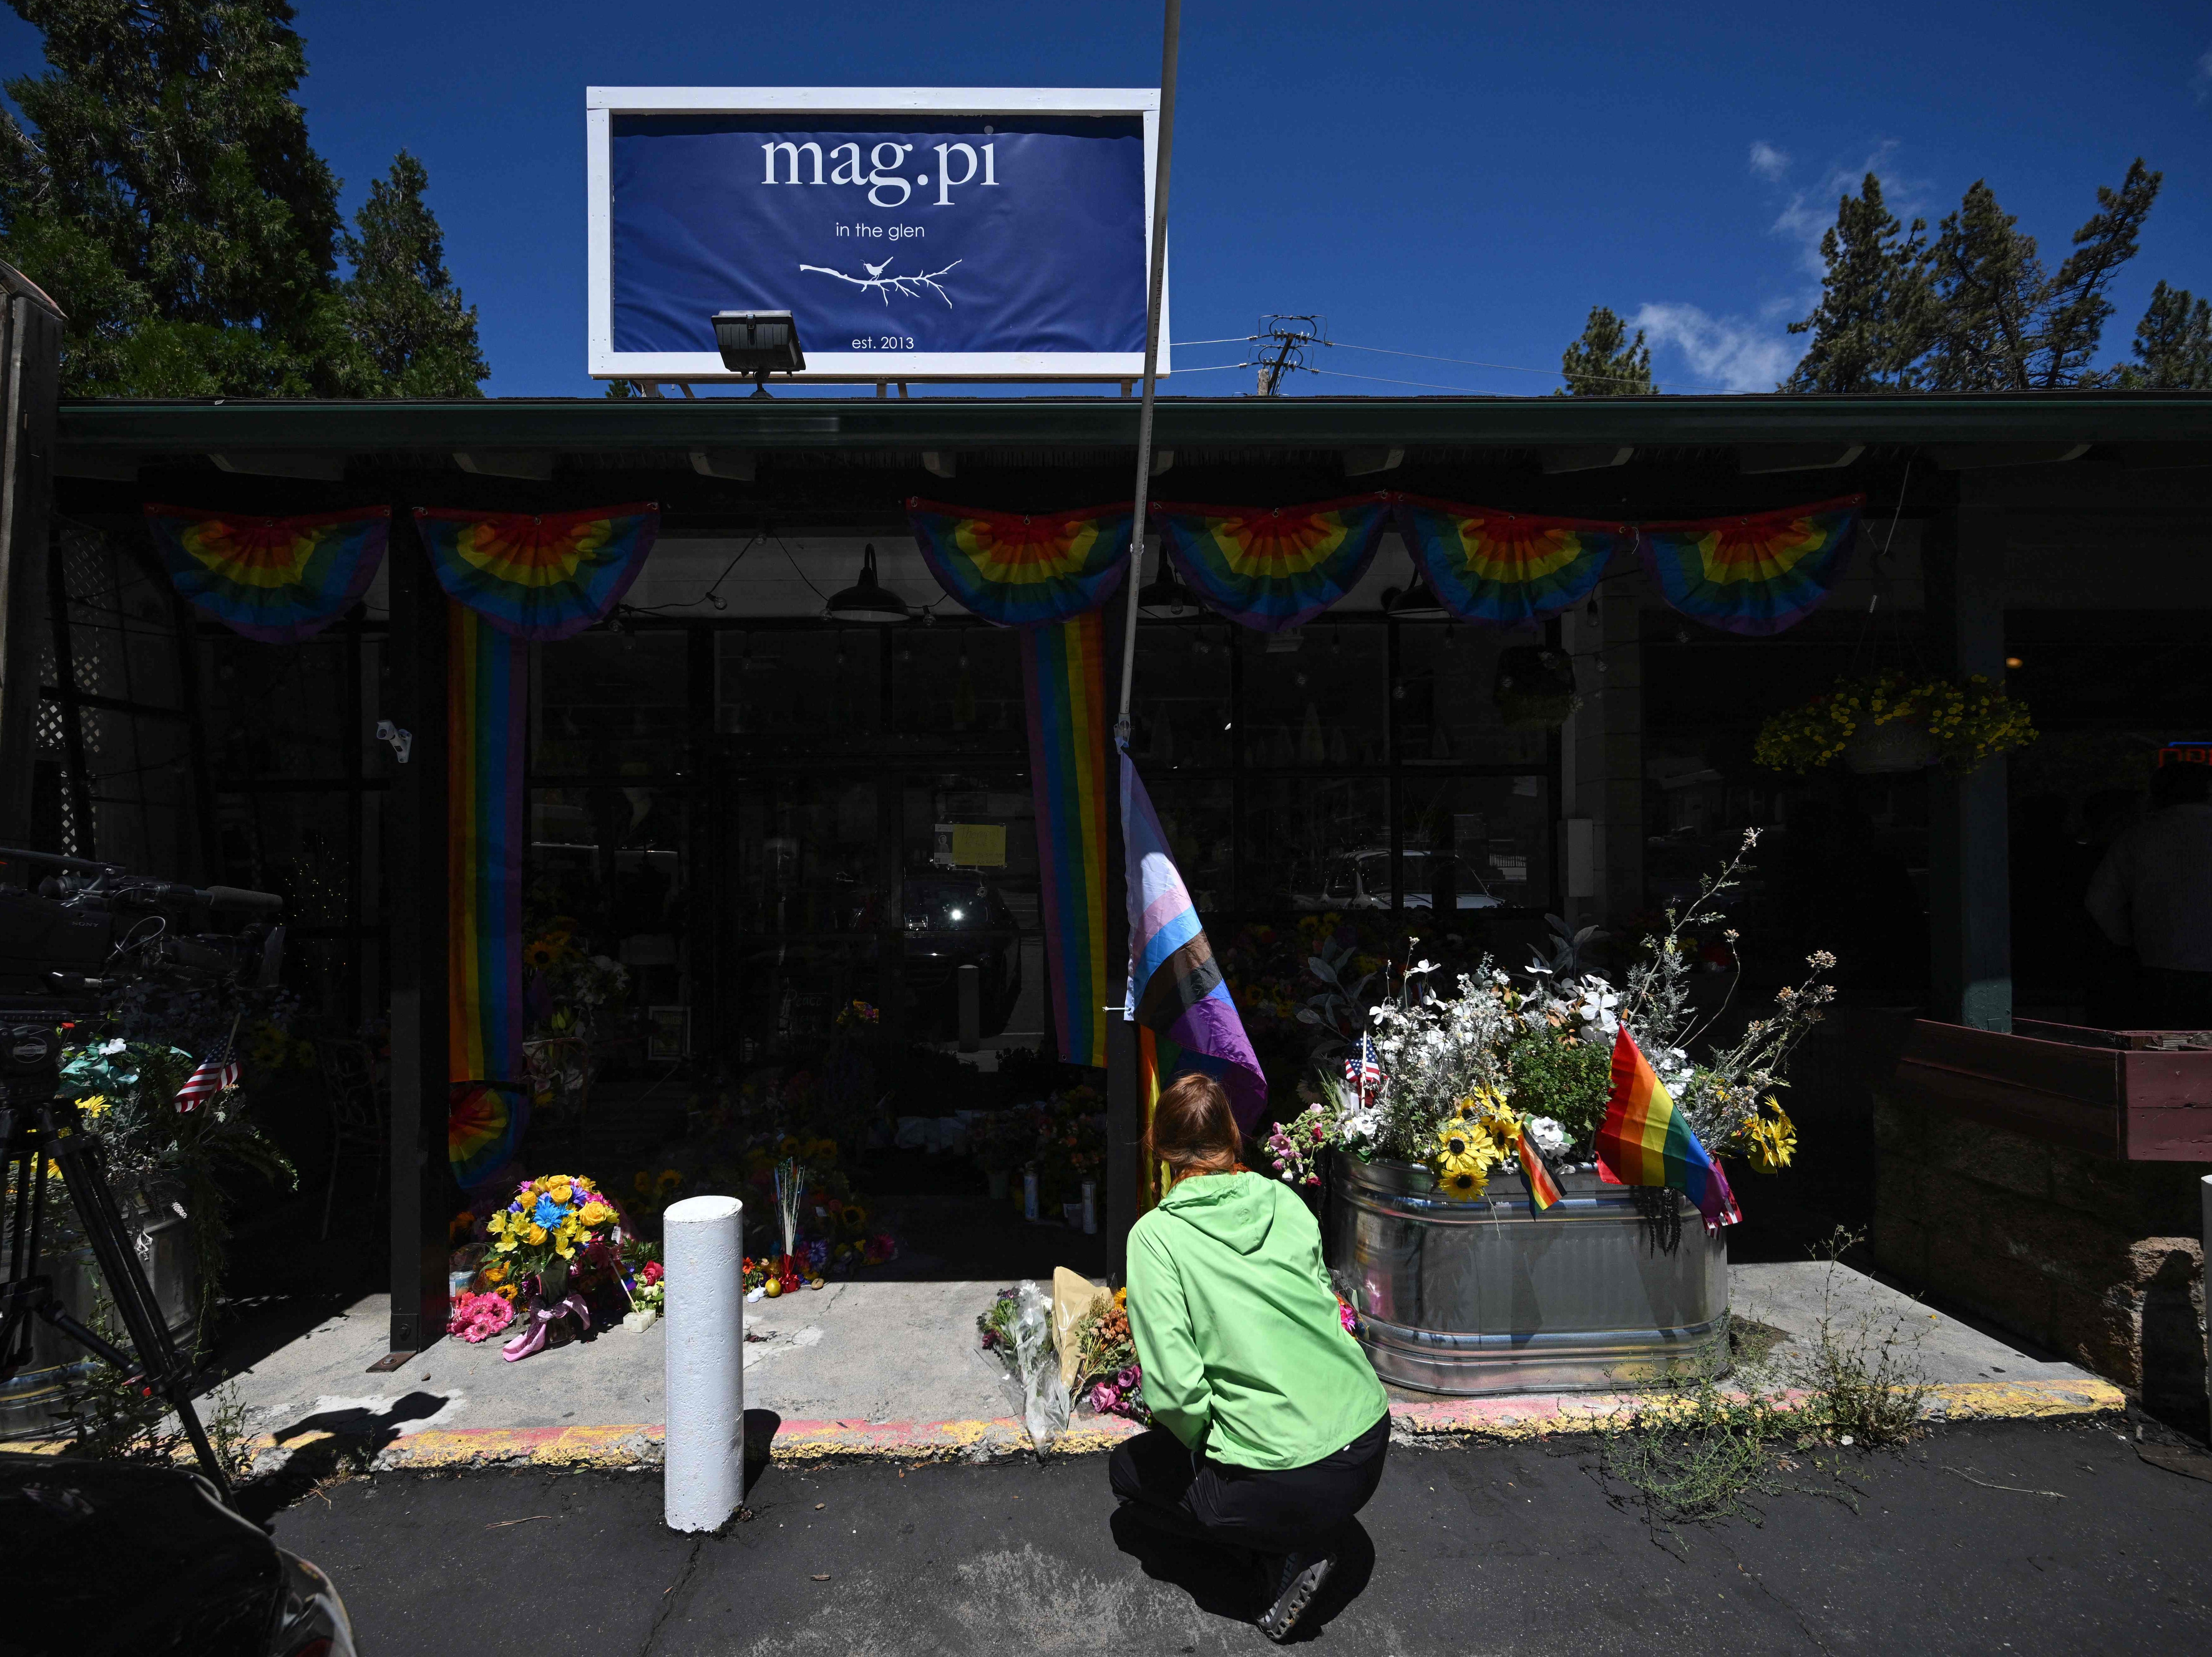 A resident leaves flowers at a makeshift memorial outside the Mag.Pi clothing store